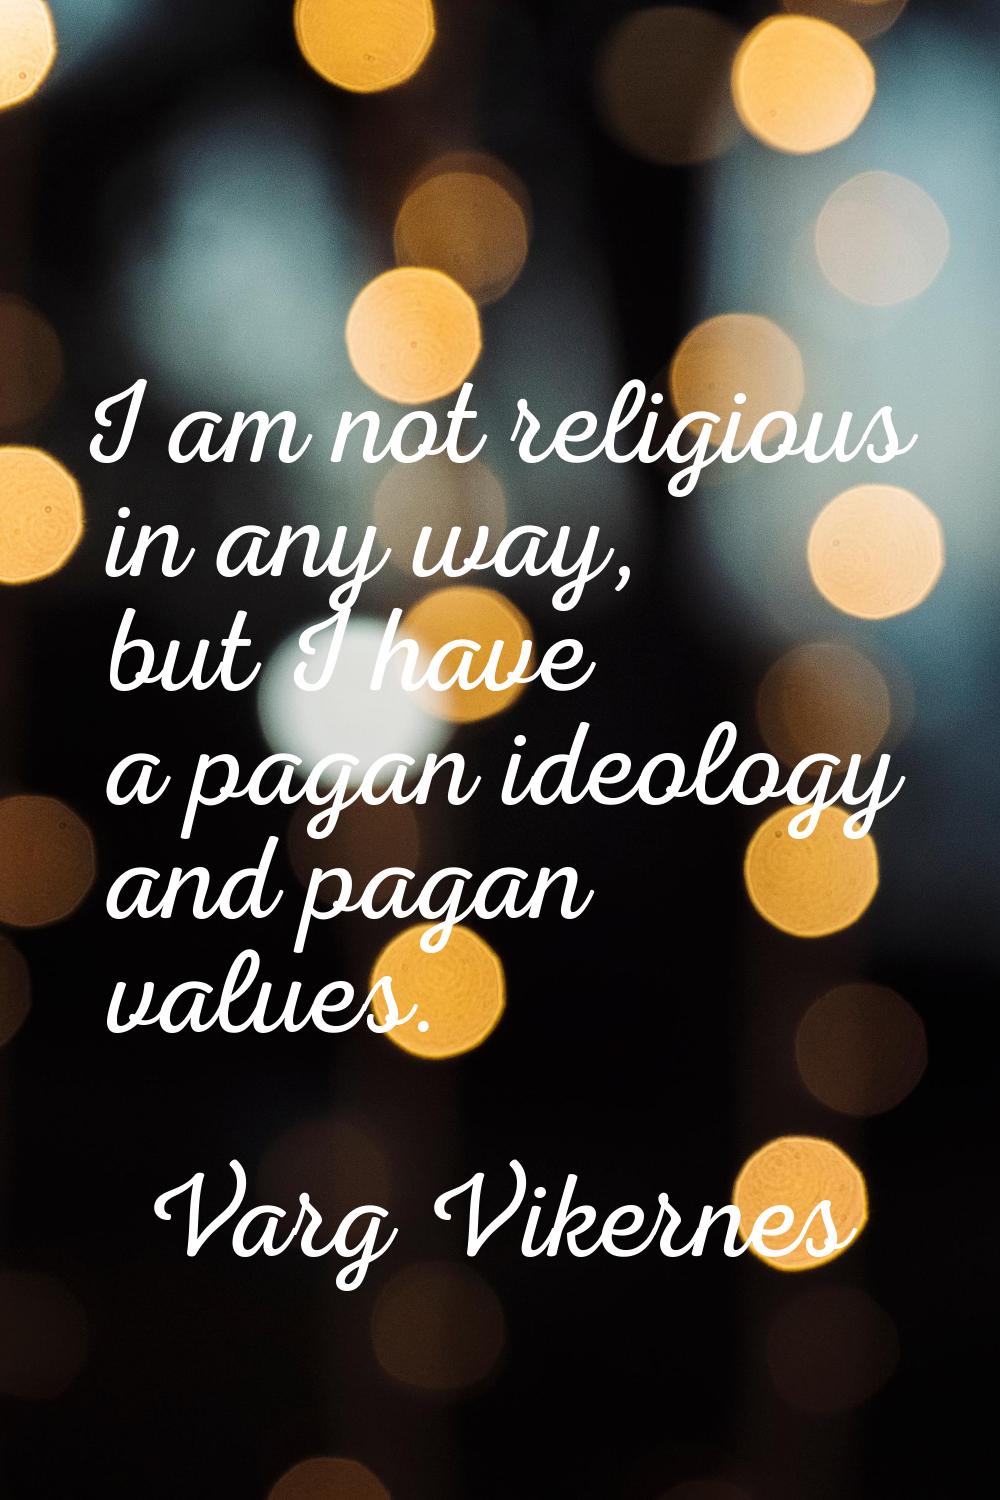 I am not religious in any way, but I have a pagan ideology and pagan values.